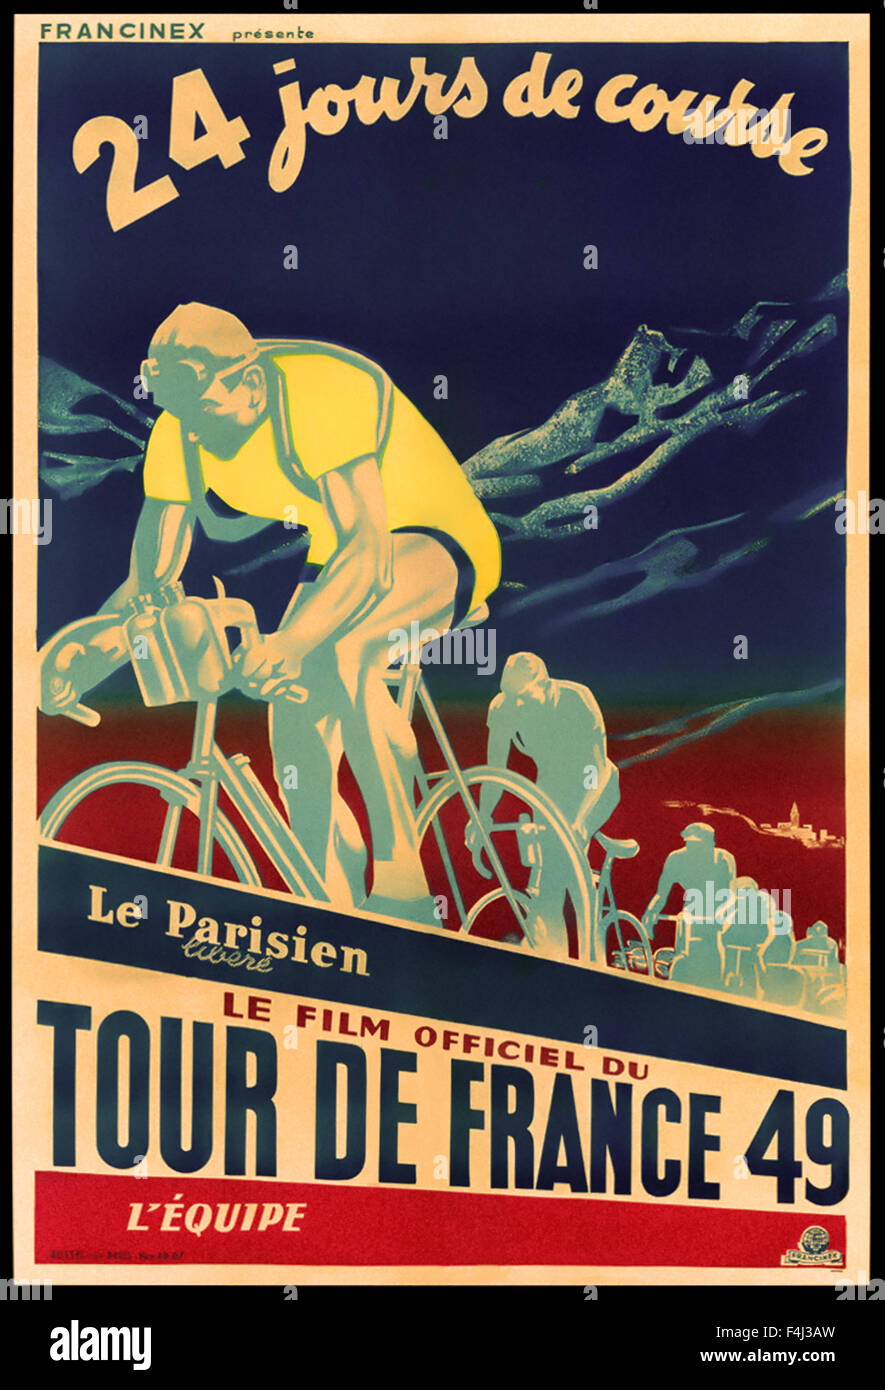 Poster for '24 Jours de Course' (24 hours of Racing), the official film of the 1949 Tour de France. Stock Photo